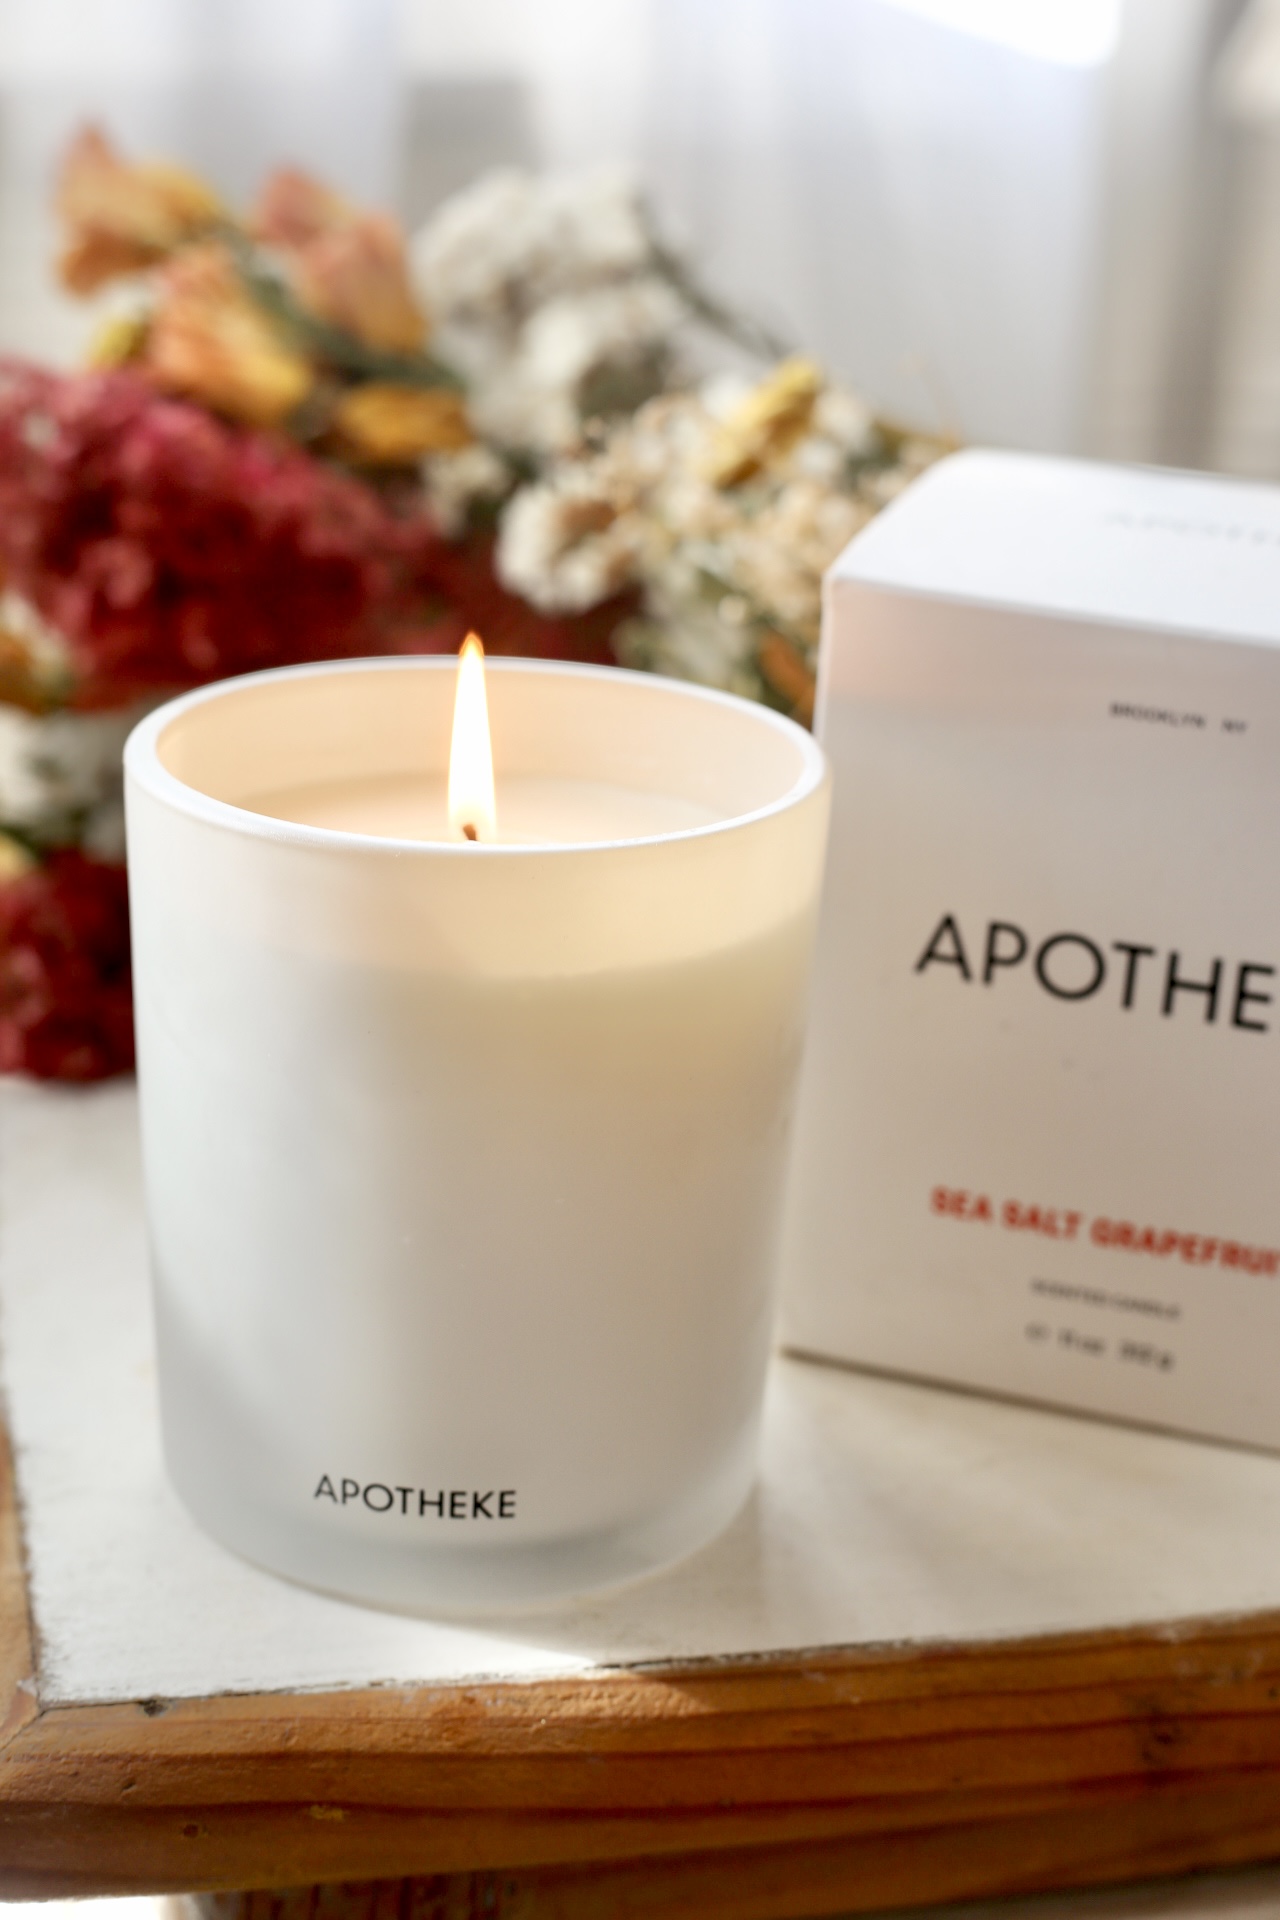 Apotheke Candles Review + Discount Code